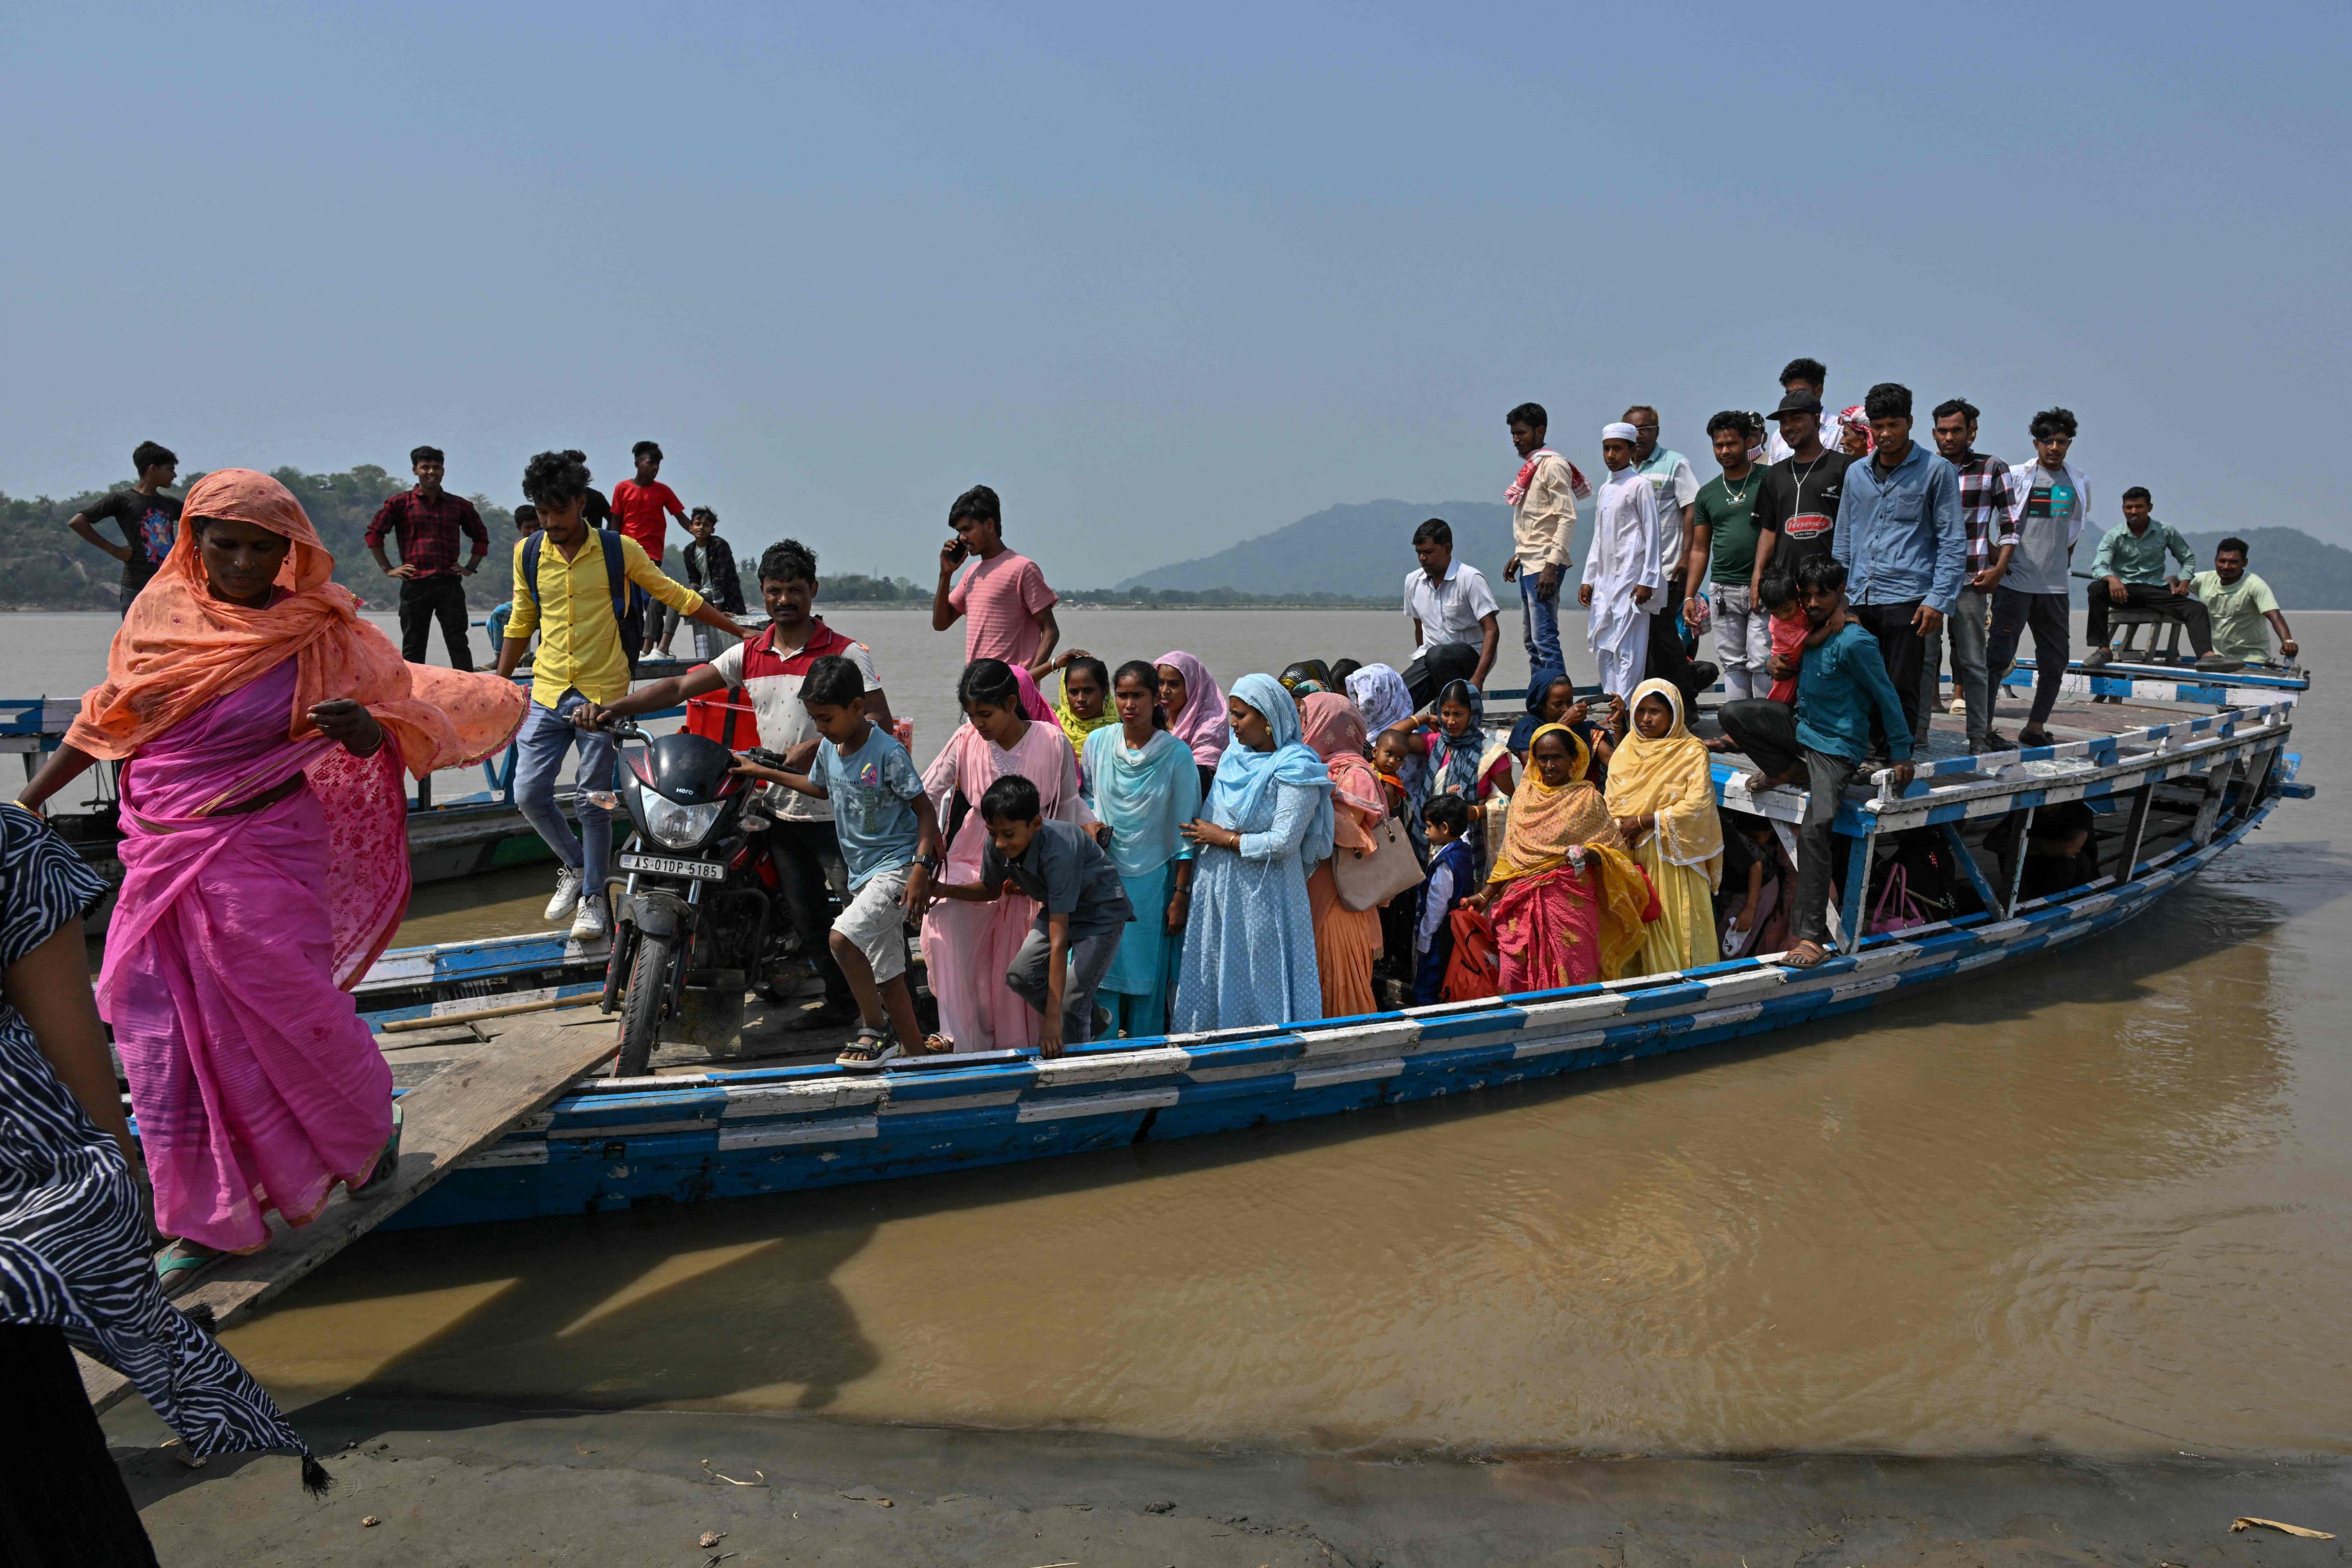 People travel on a boat to cast their ballot near a polling station during India’s general election in Assam state on April 26. Photo: AFP